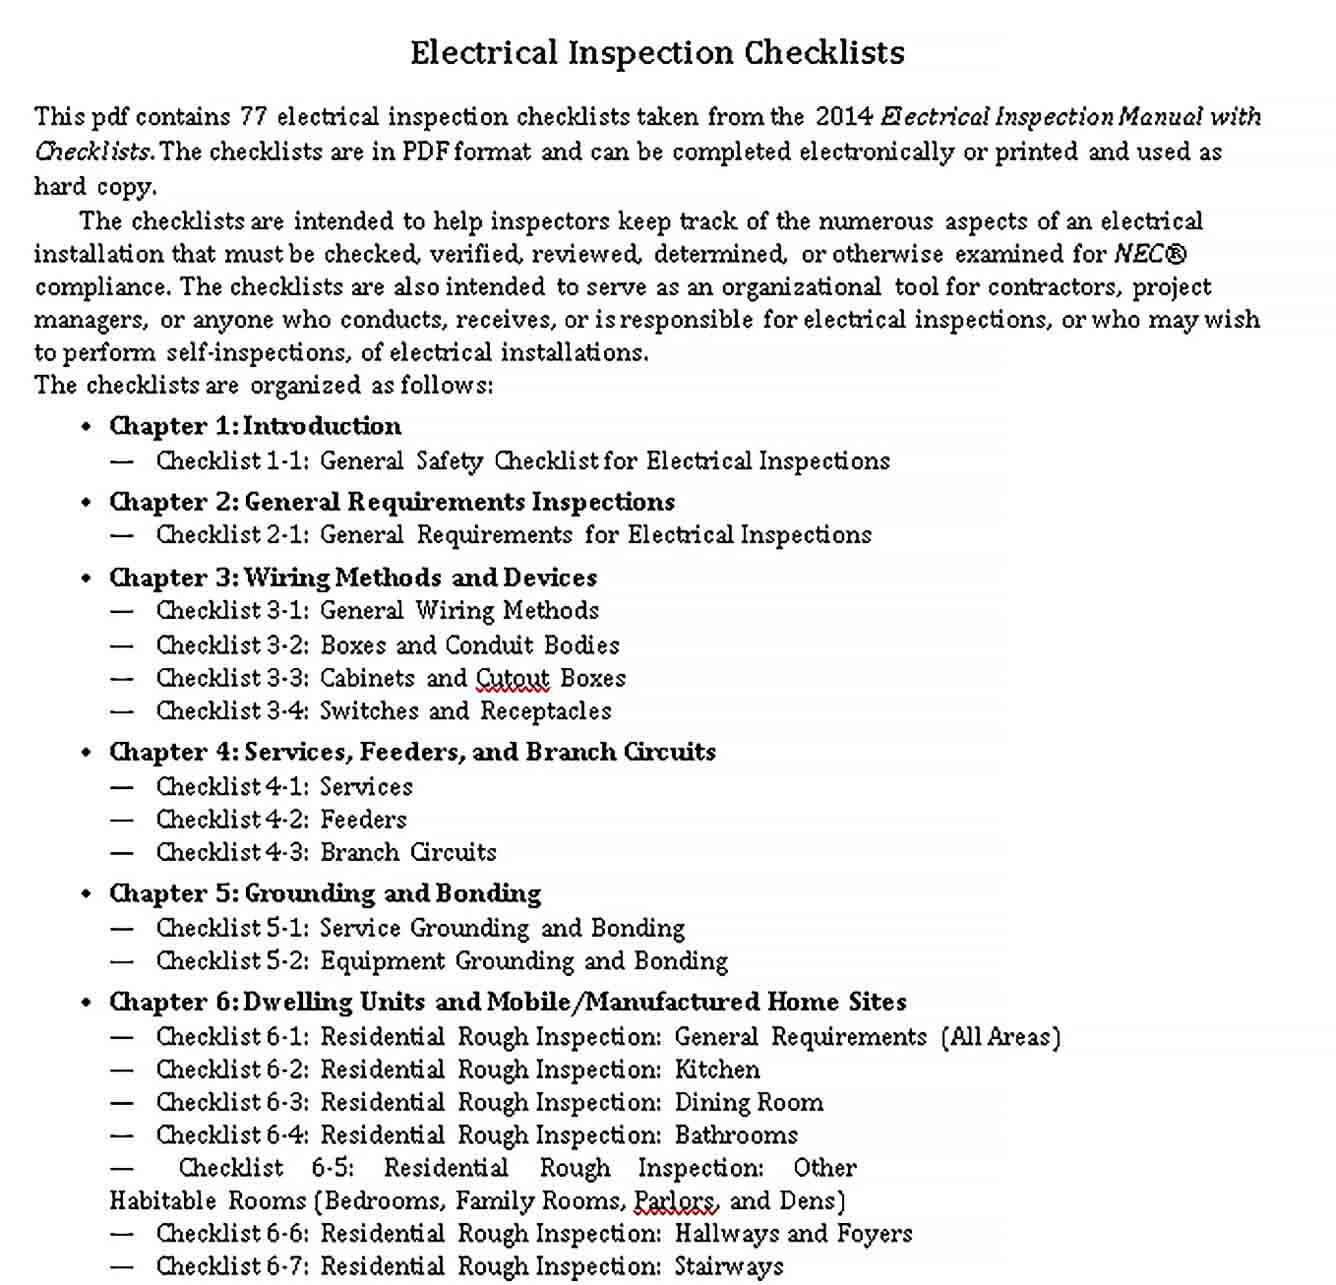 Sample Electrical Inspection Checklist